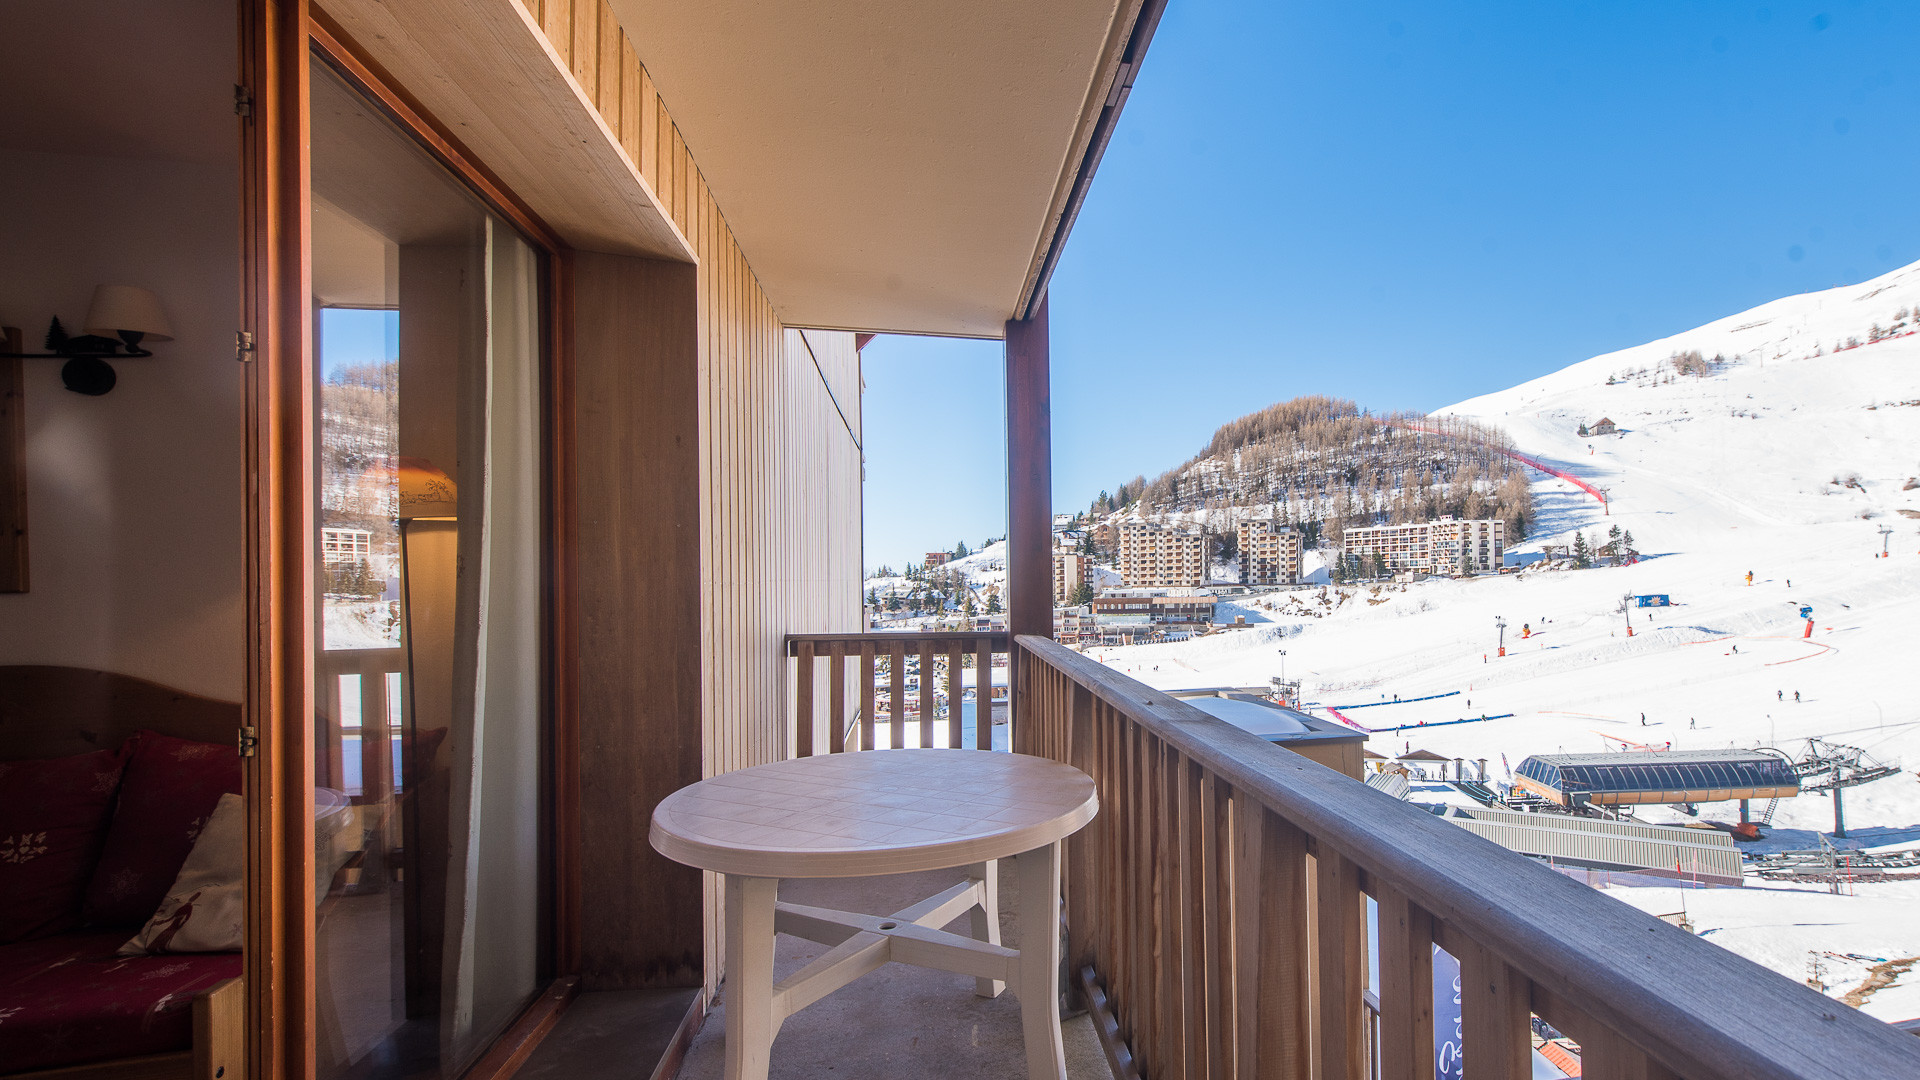 2 rooms 4 persons view of the ski slopes - Apartements T. Bergerie - A104 - Appart Belle vue 4 pers - Orcières Merlette 1850